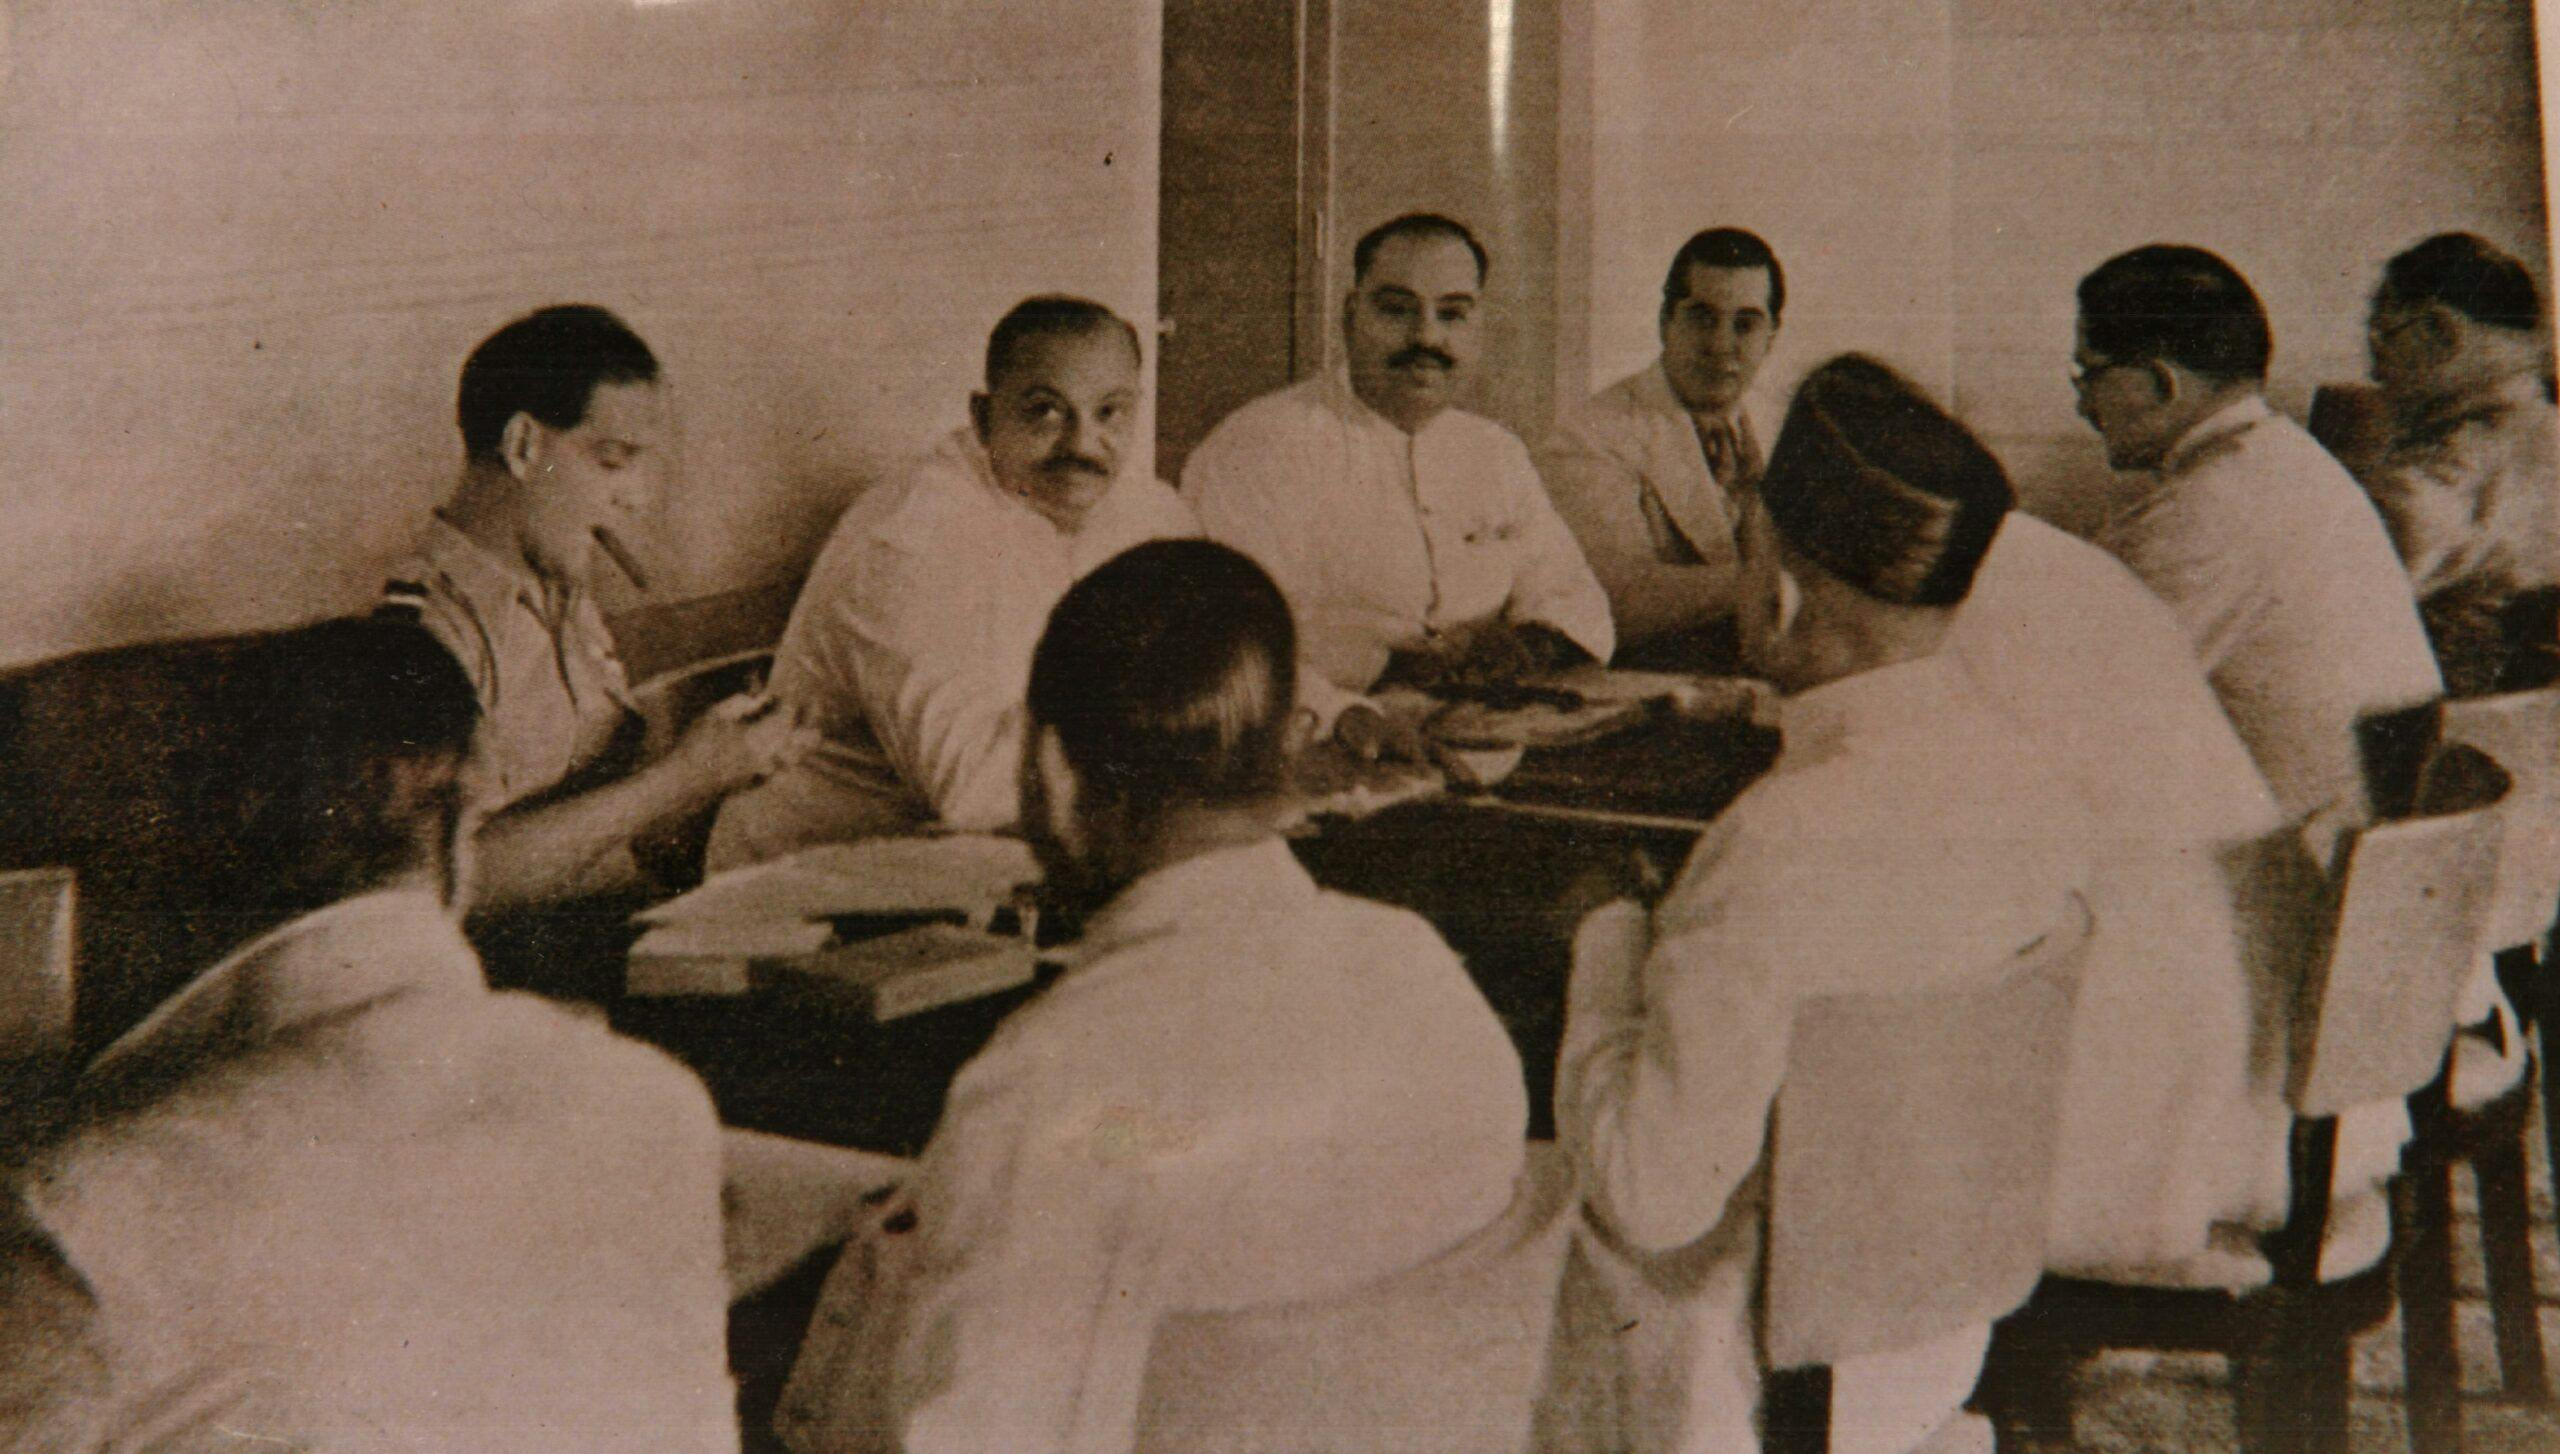 From Left to Right: Nawab of Bhopal, Jamsaheb of Nawanagar and Maharaja of Bikaner discussing the accession to the Indian Union in 1947